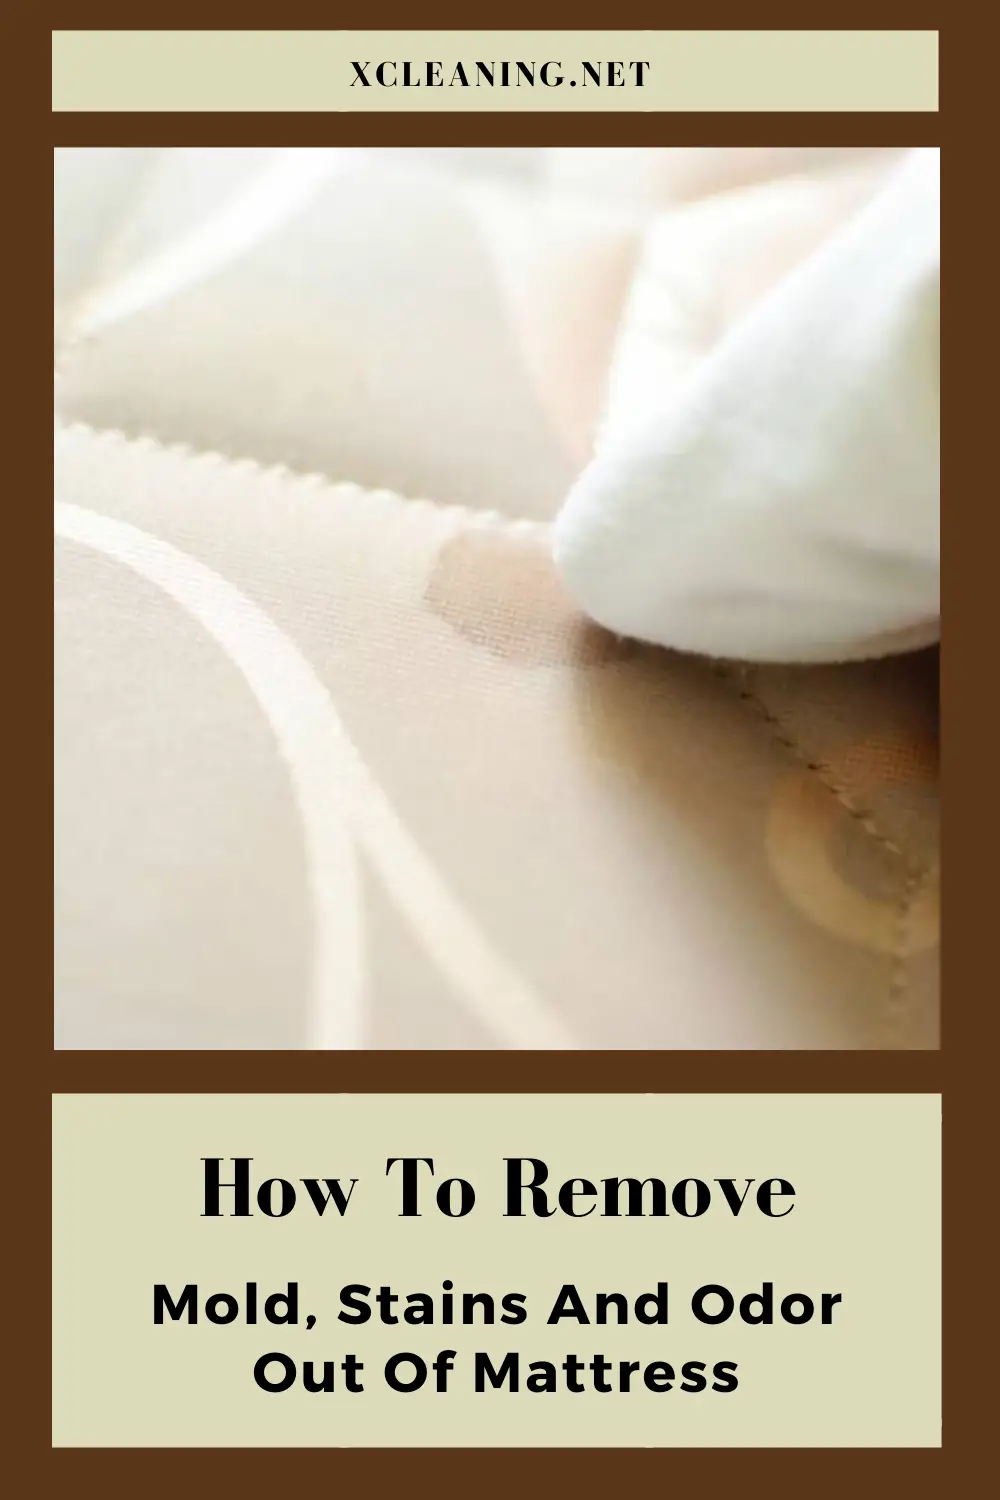 How To Remove Mold, Stains And Odor Out Of Mattress